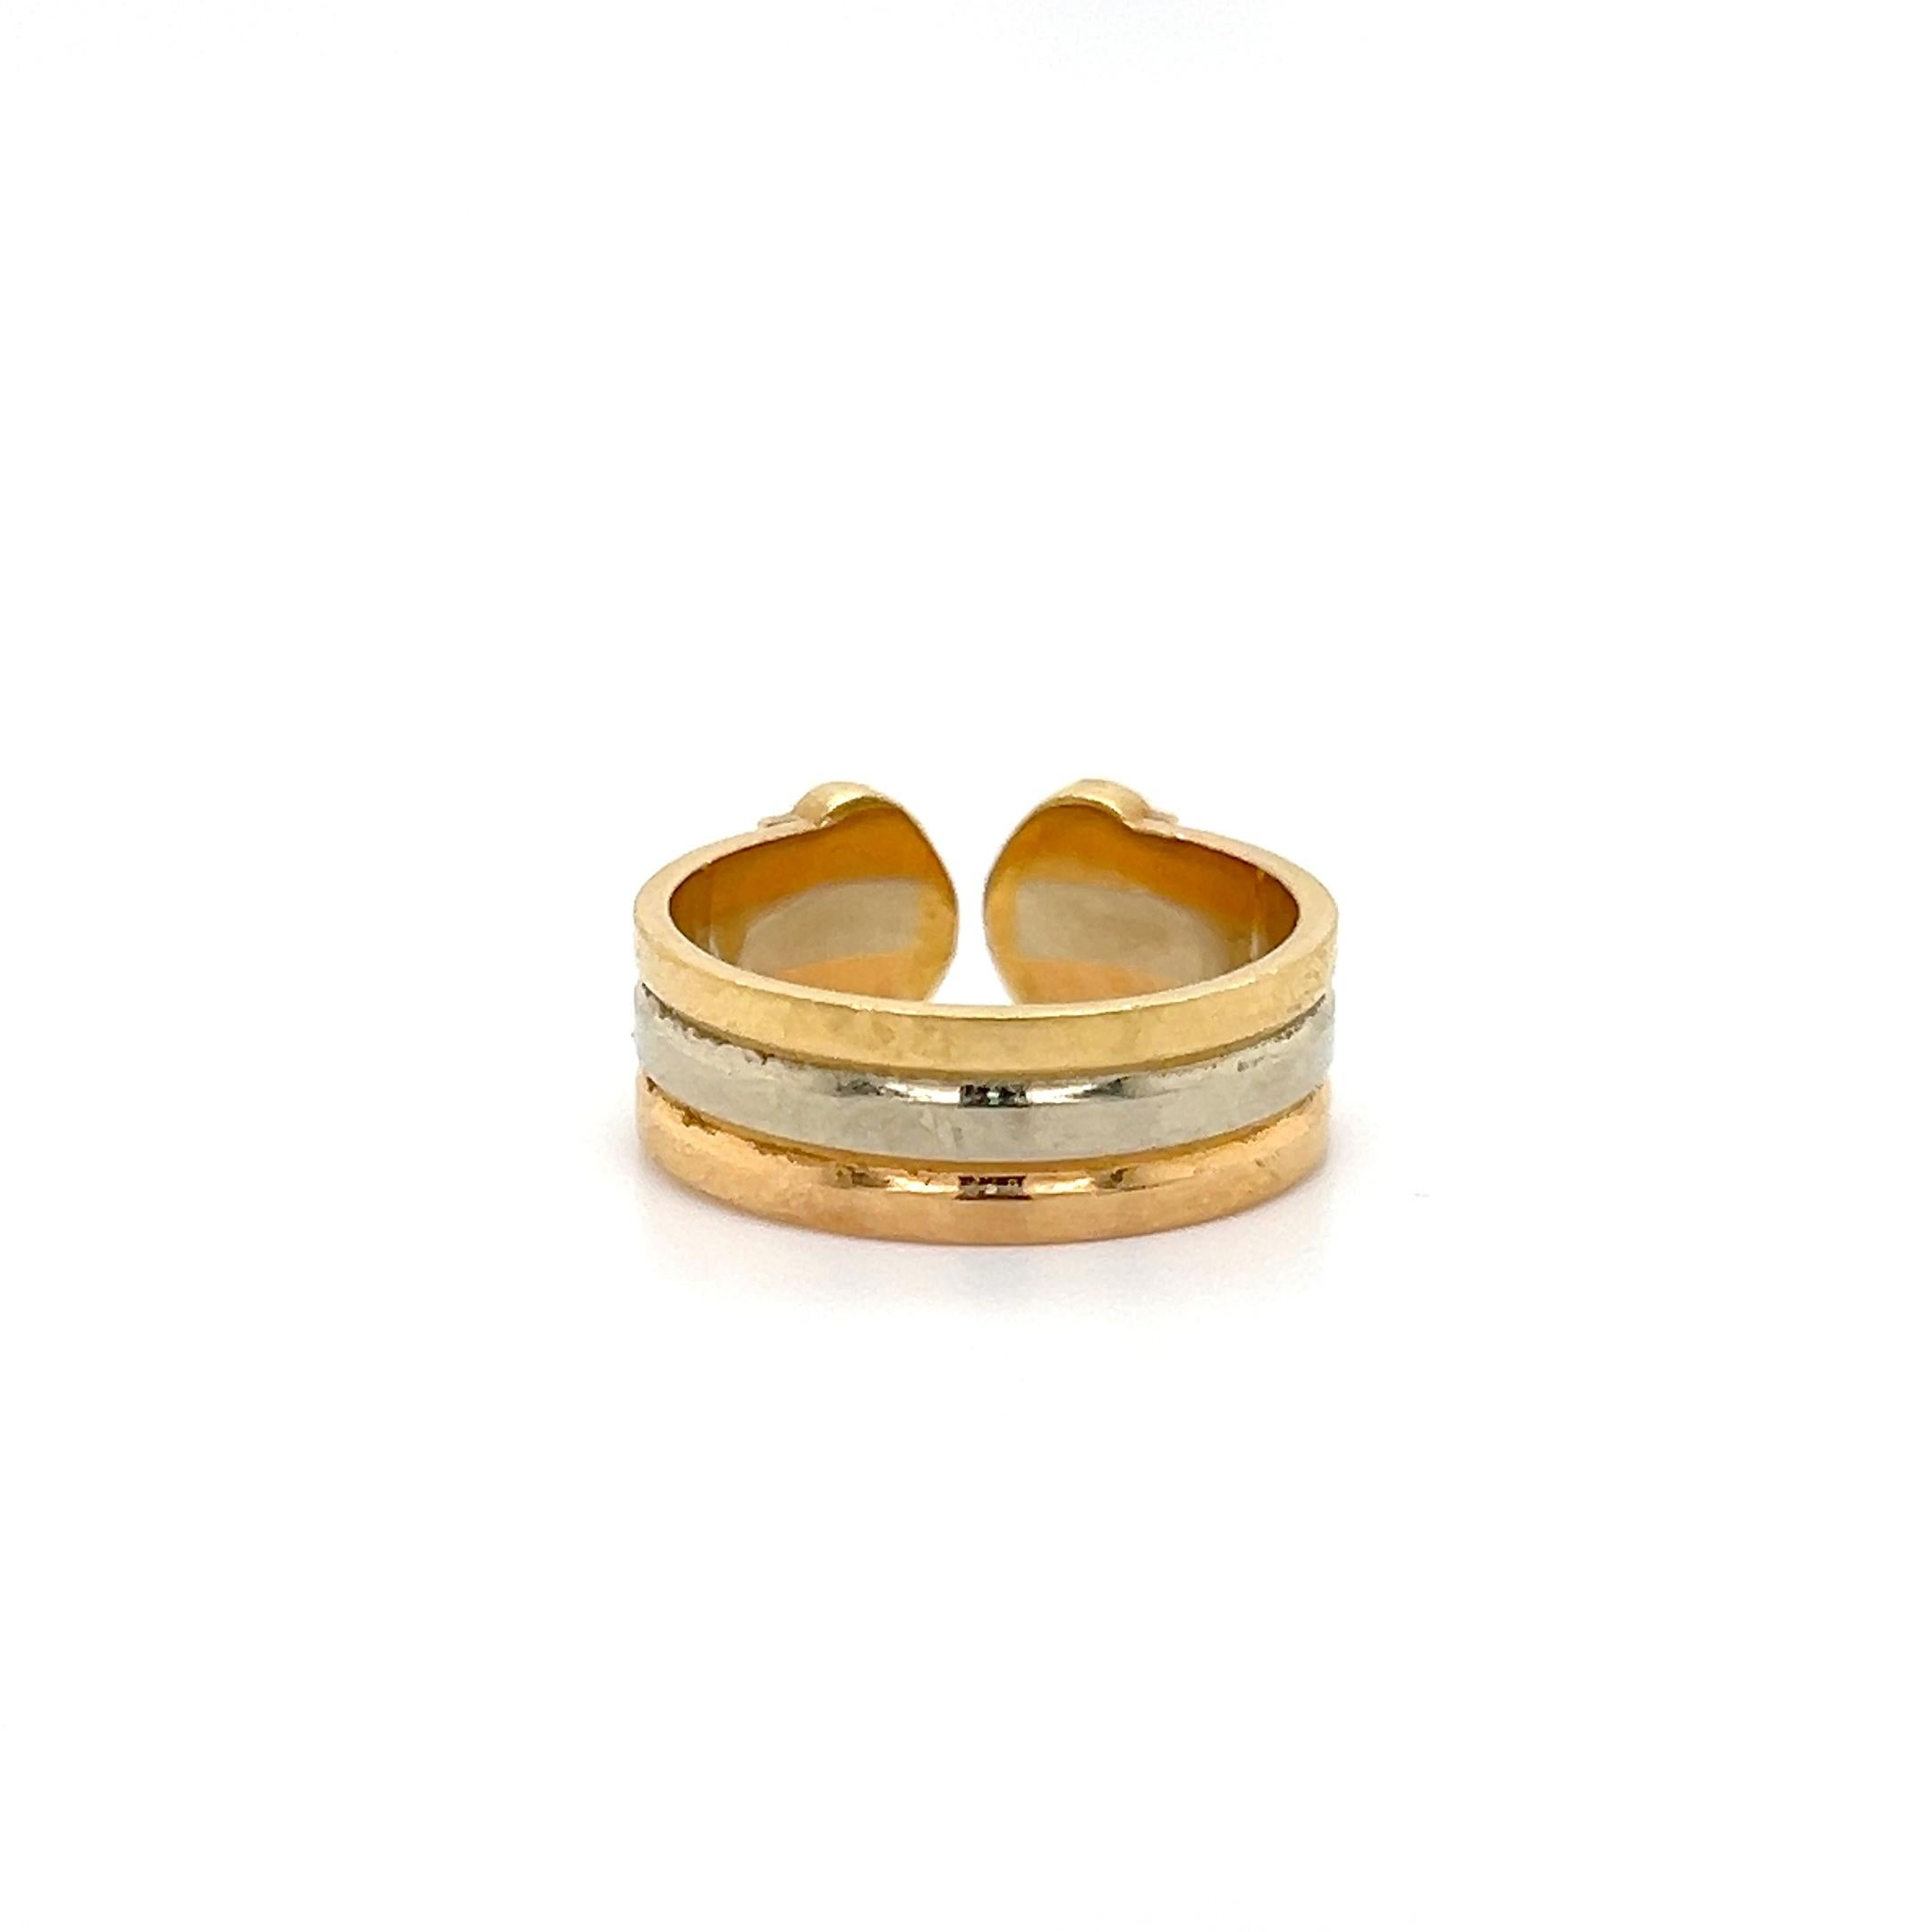 Timeless design by famed designer Cartier. The ring is crafted in 18k gold with a tri color design. Rows of yellow, white and rose gold lead to an open work double C design. The ring is a size 48 or 4.5, the ring is fully hallmarked by the designer